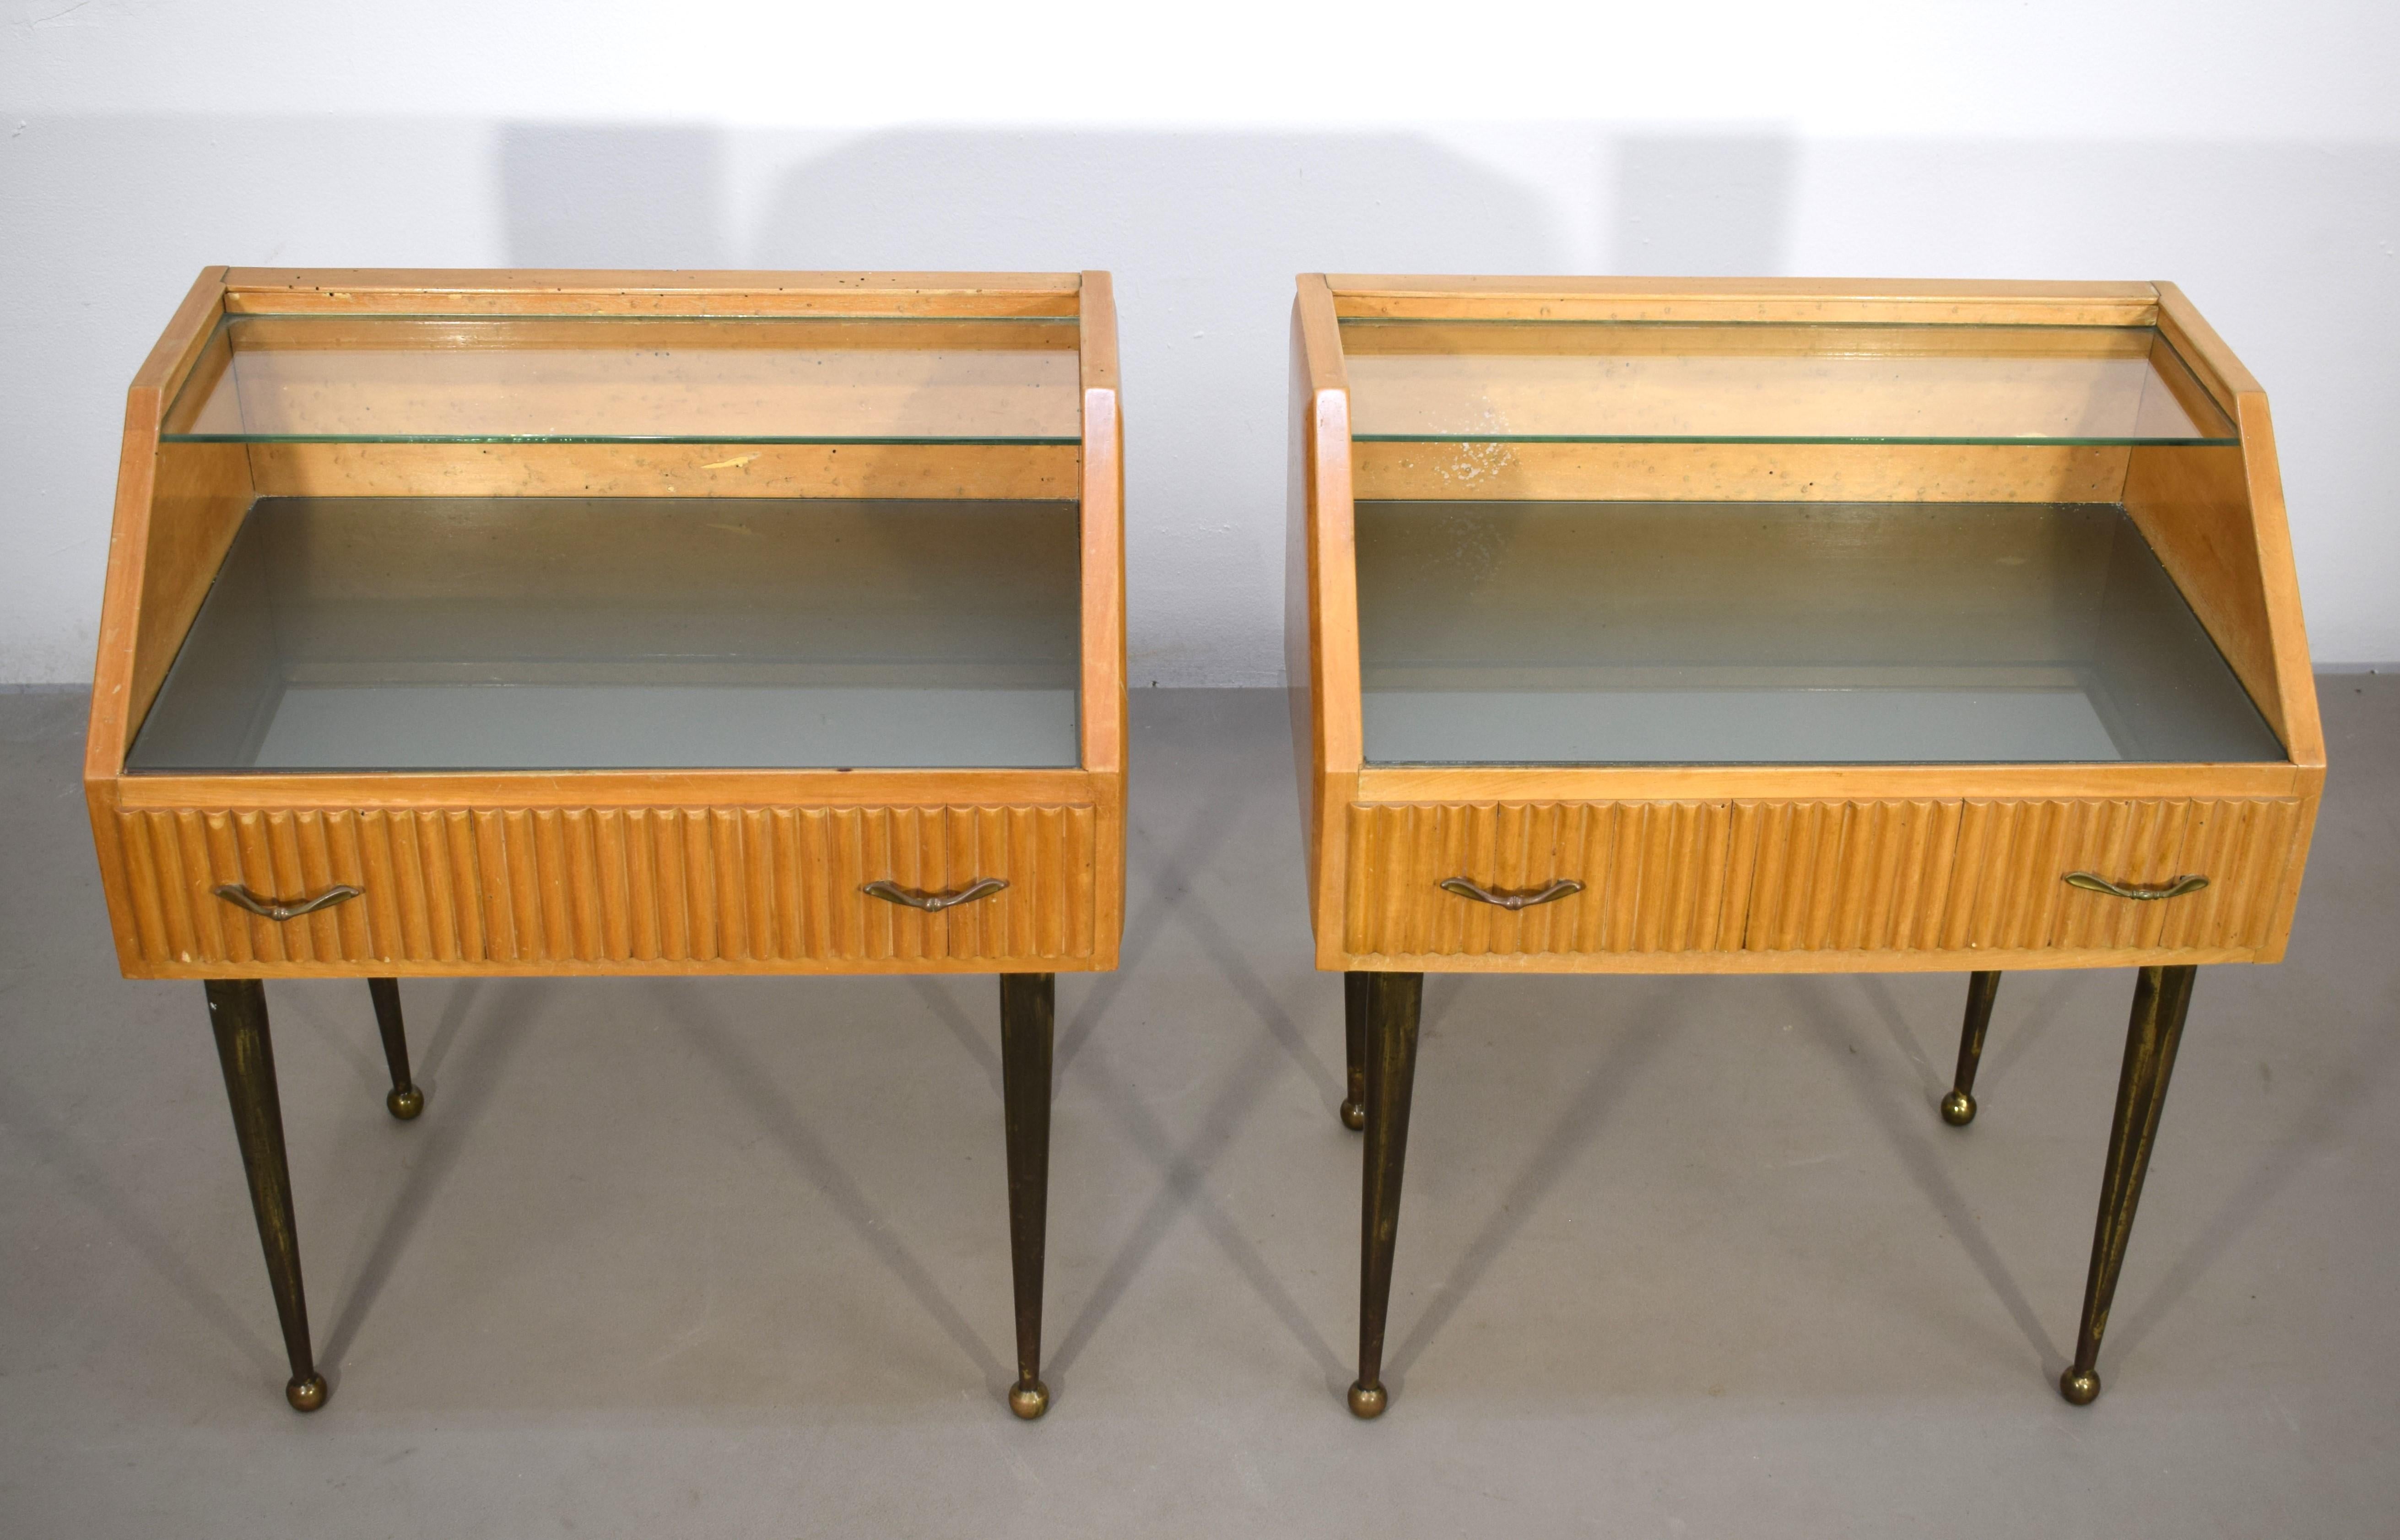 Pair of Italian nightstands, wood, brass and glass, 1950s.

Dimensions: H= 61 cm; W= 52 cm; D= 34 cm.